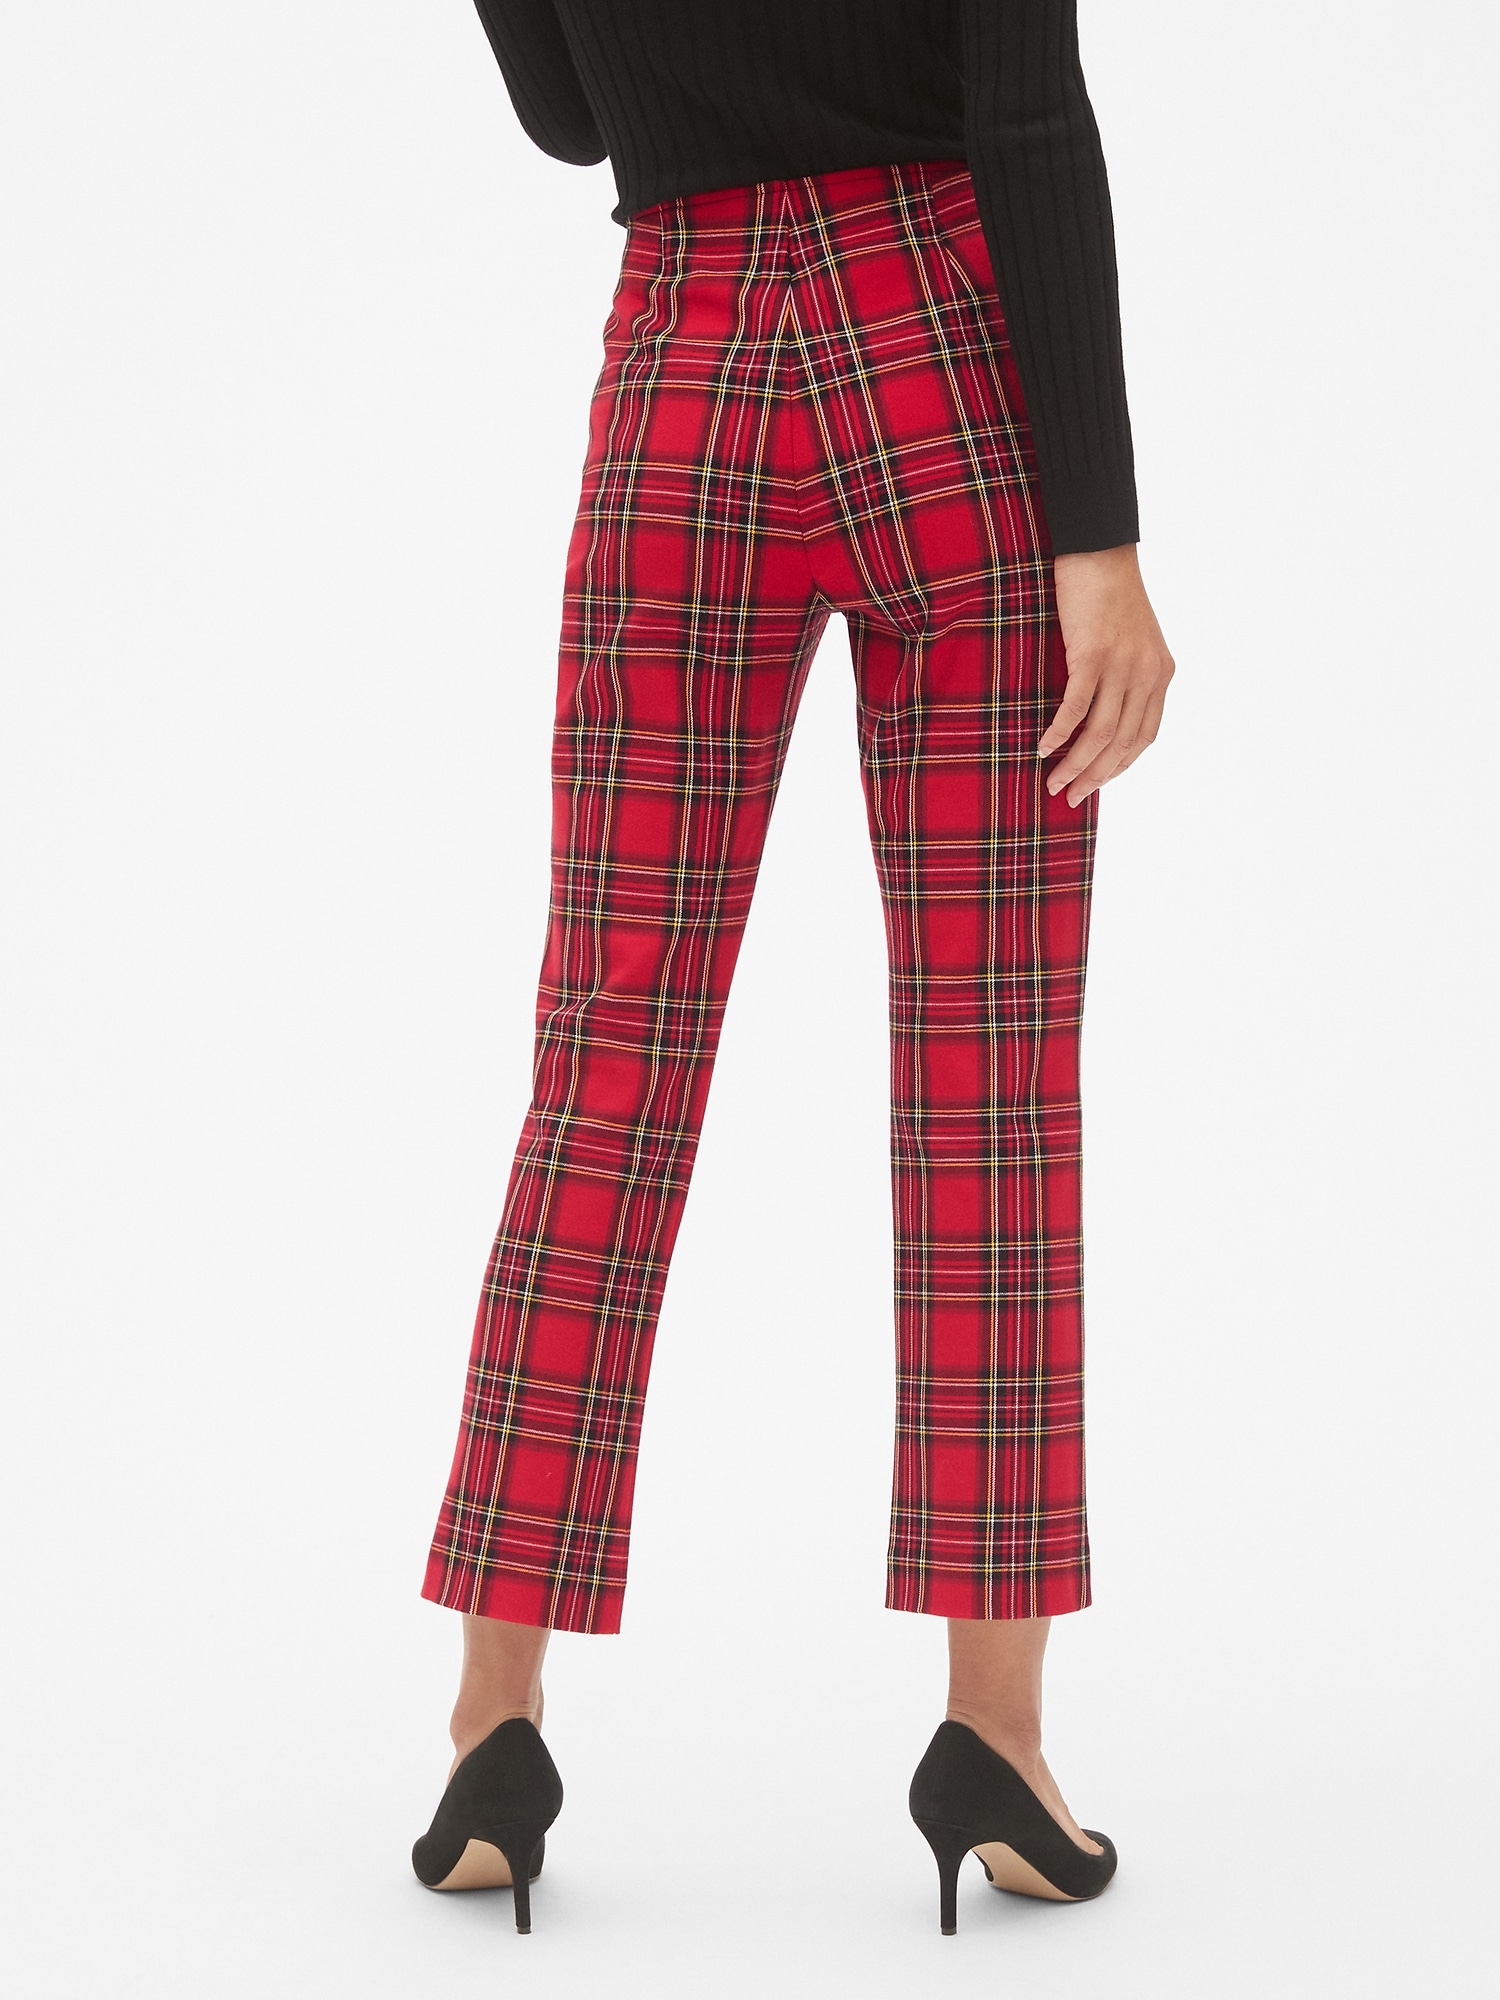 NEW Urban Outfitters Womens XS Red Plaid High Waist Tapered Mom Skinny Leg  Pants | eBay